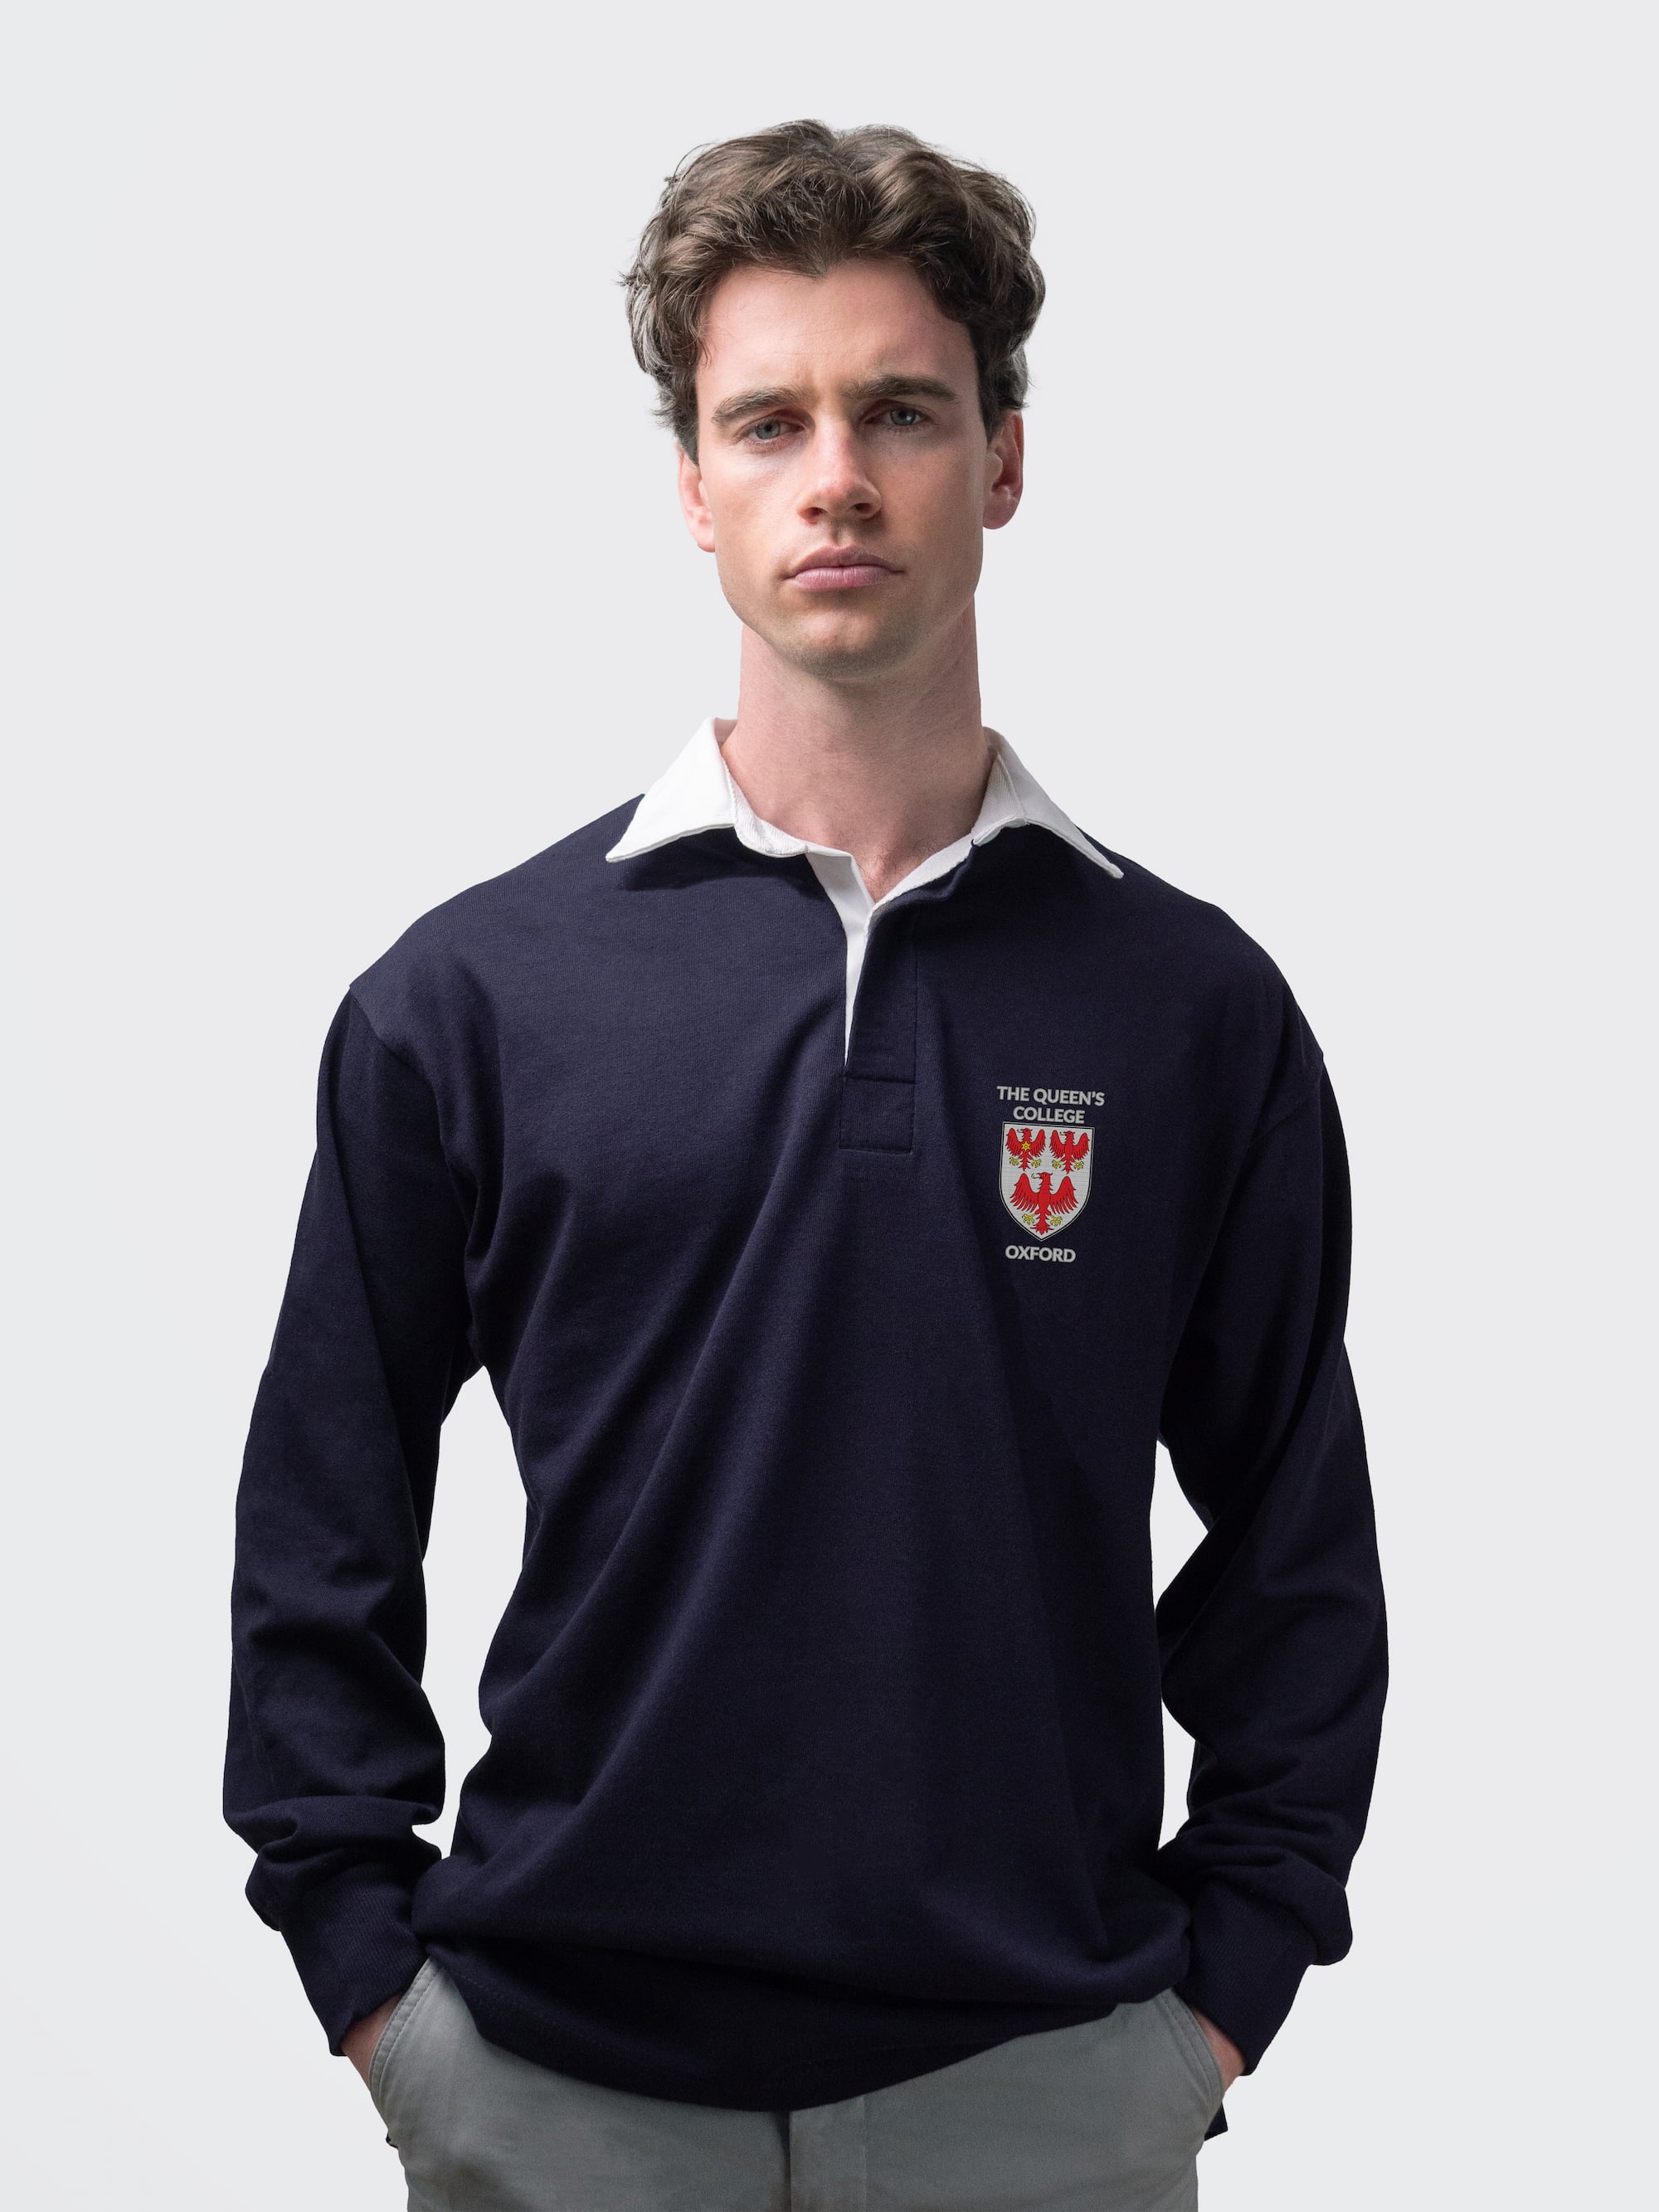 The Queen's student wearing an embroidered mens rugby shirt in navy